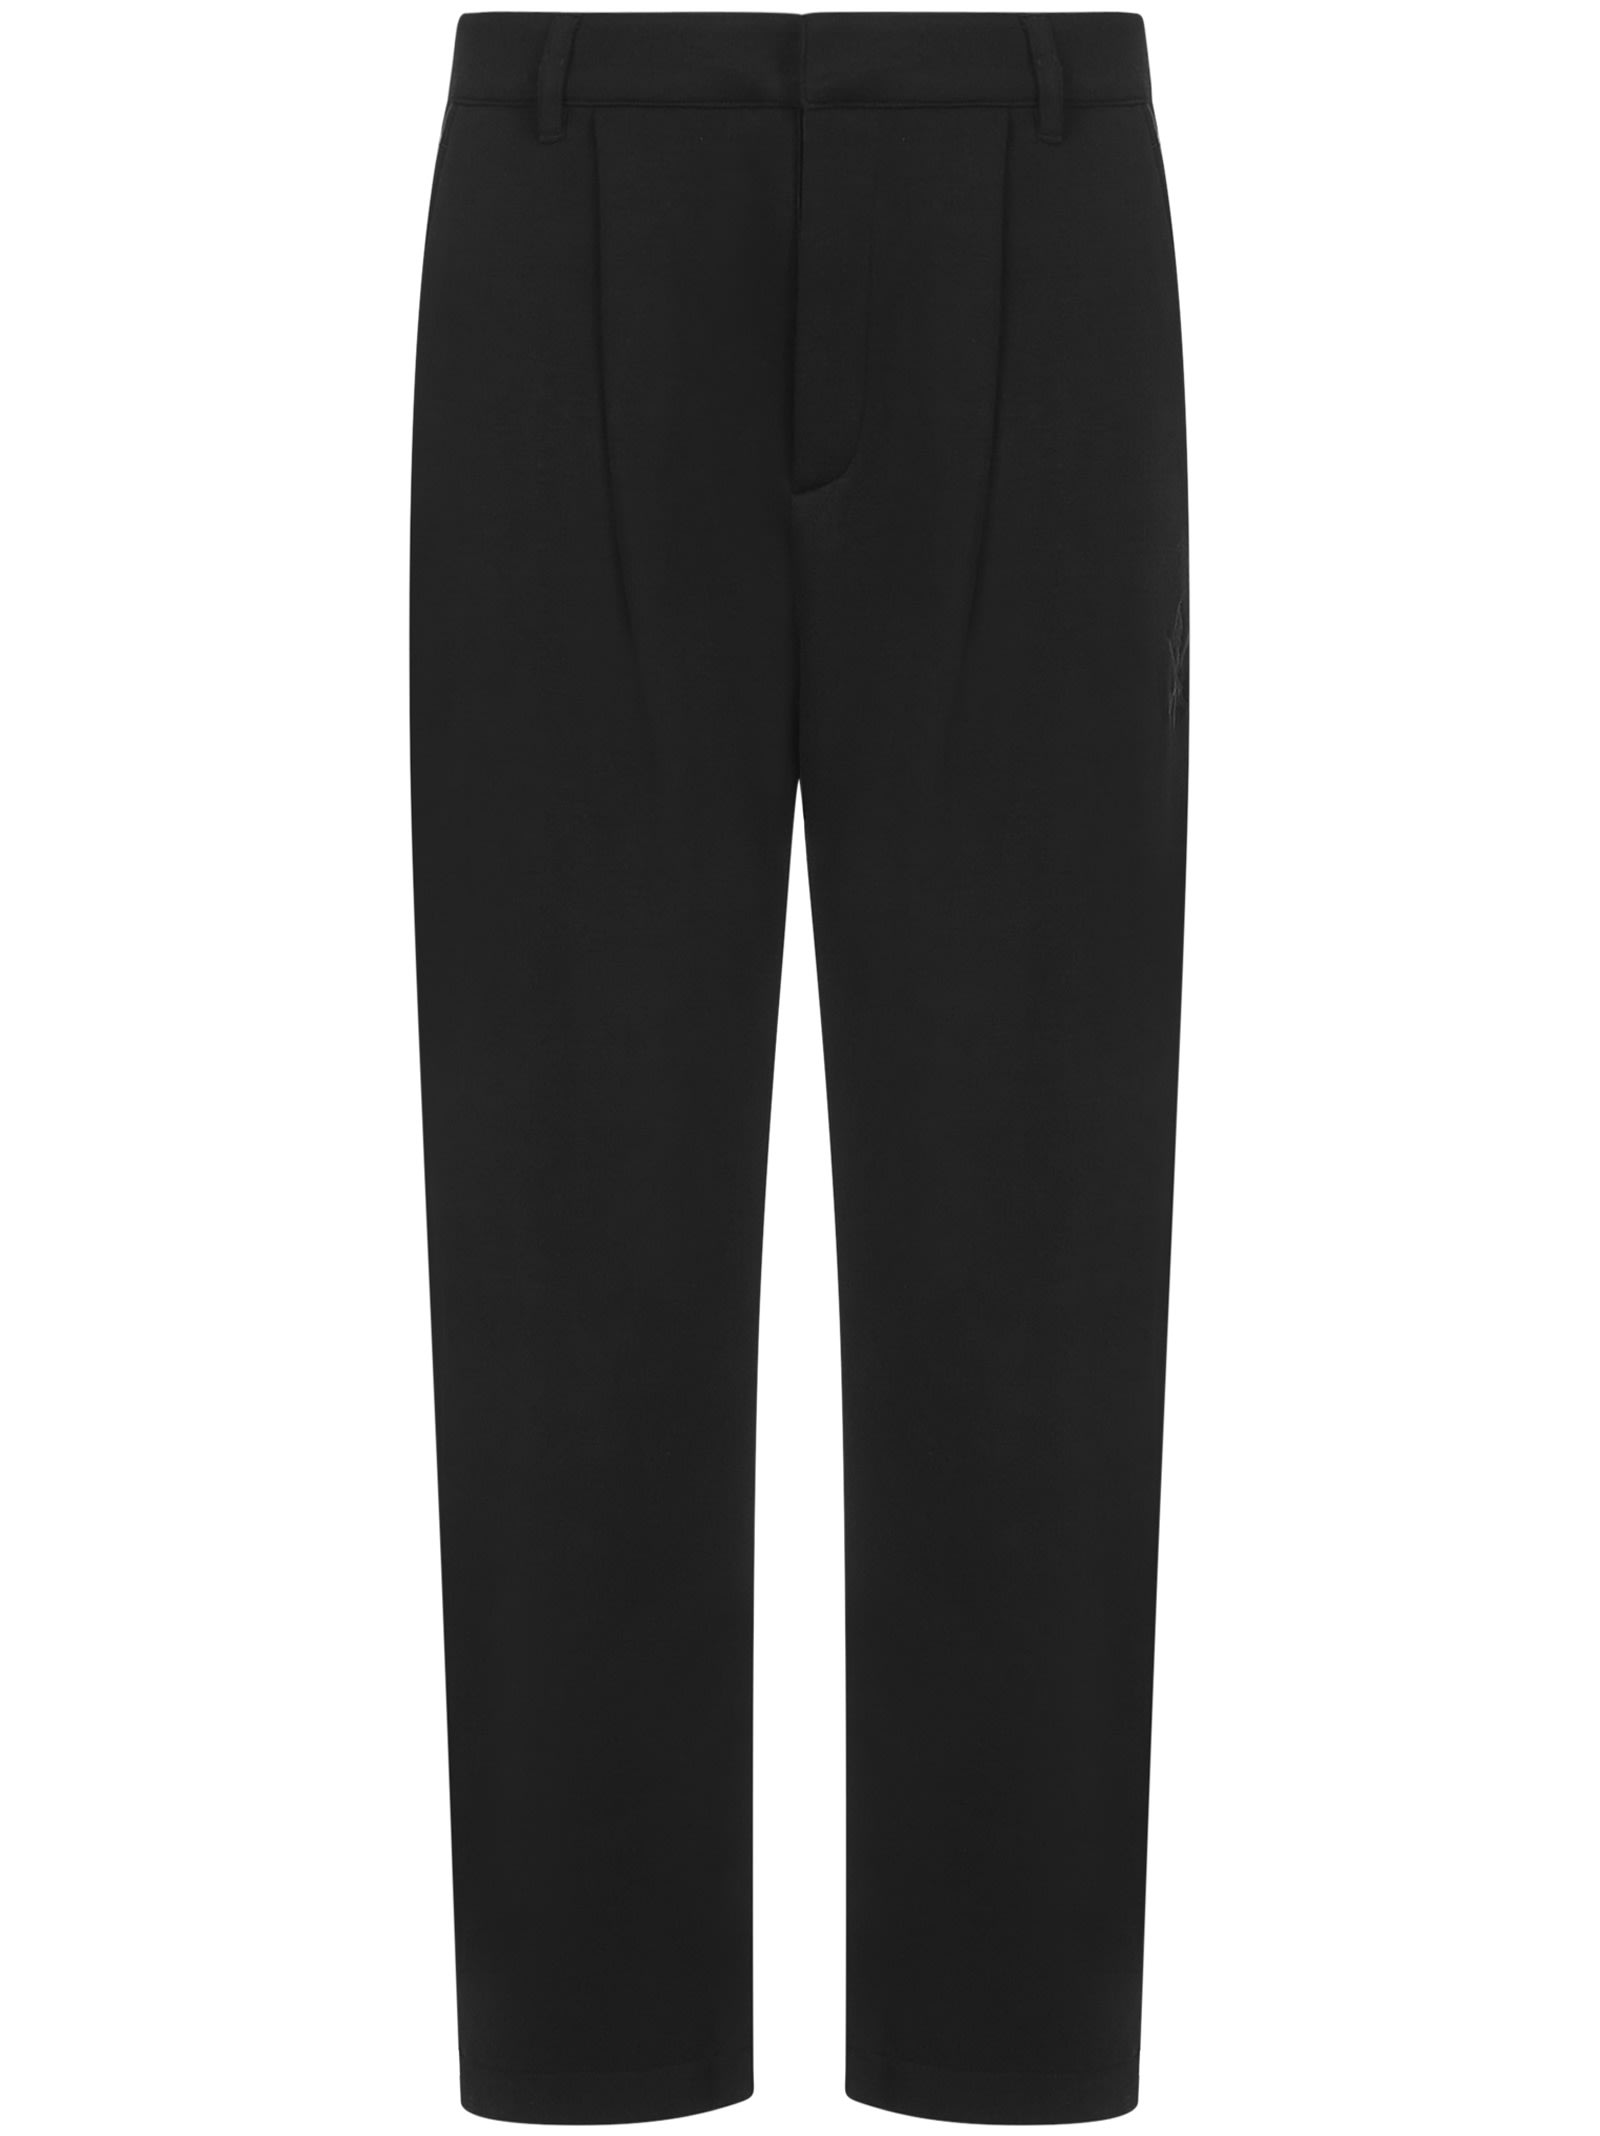 OPENING CEREMONY BONDED TROUSERS,YMCA009F21FLE001 1005